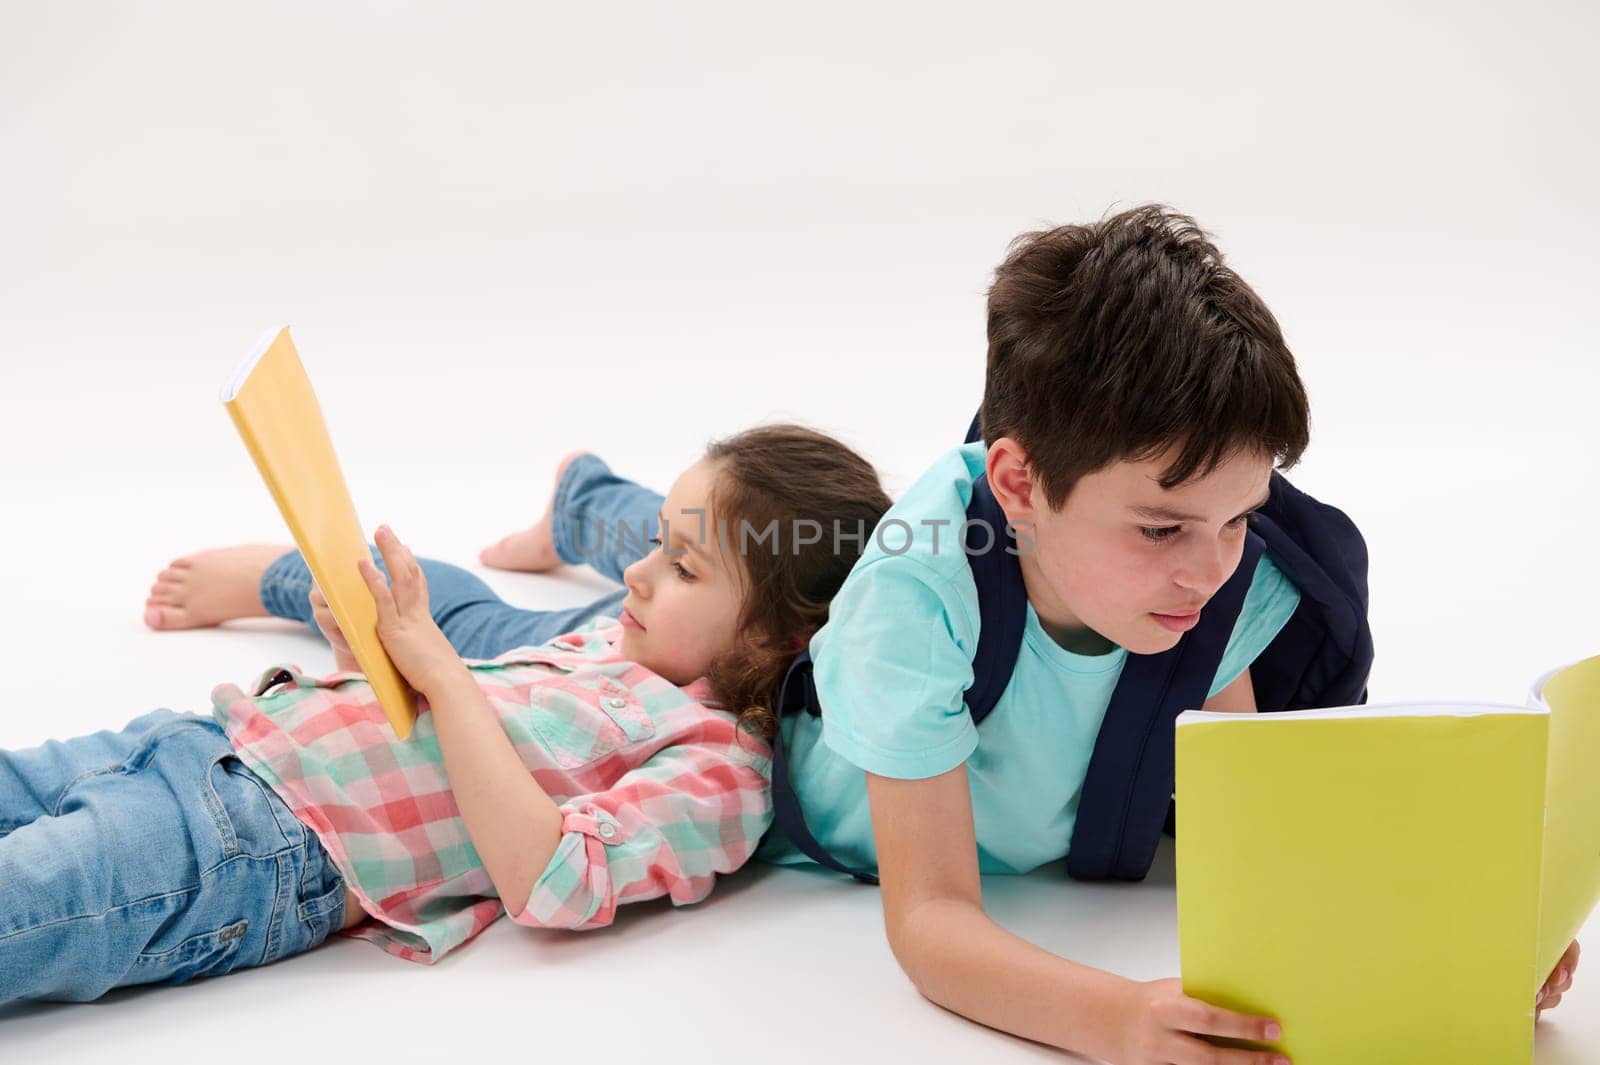 Two smart kids, lovely preschooler girl and teenage boy, brother and sister holding workbooks, doing homework while lying on a white background. Back to school concept. Children Childhood Education